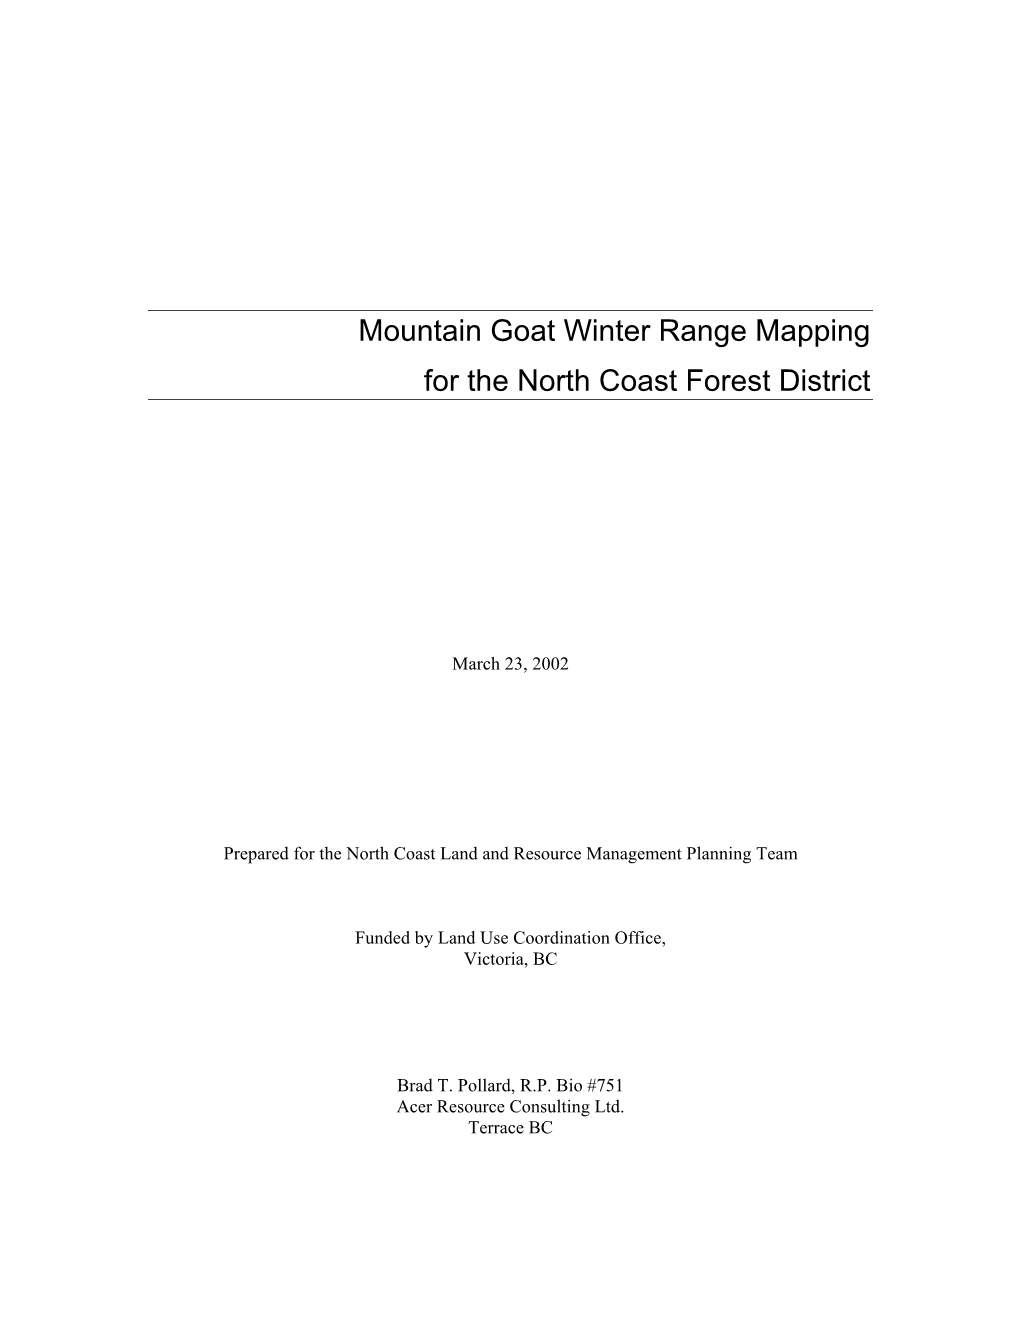 Mountain Goat Winter Range Mapping for the North Coast Forest District